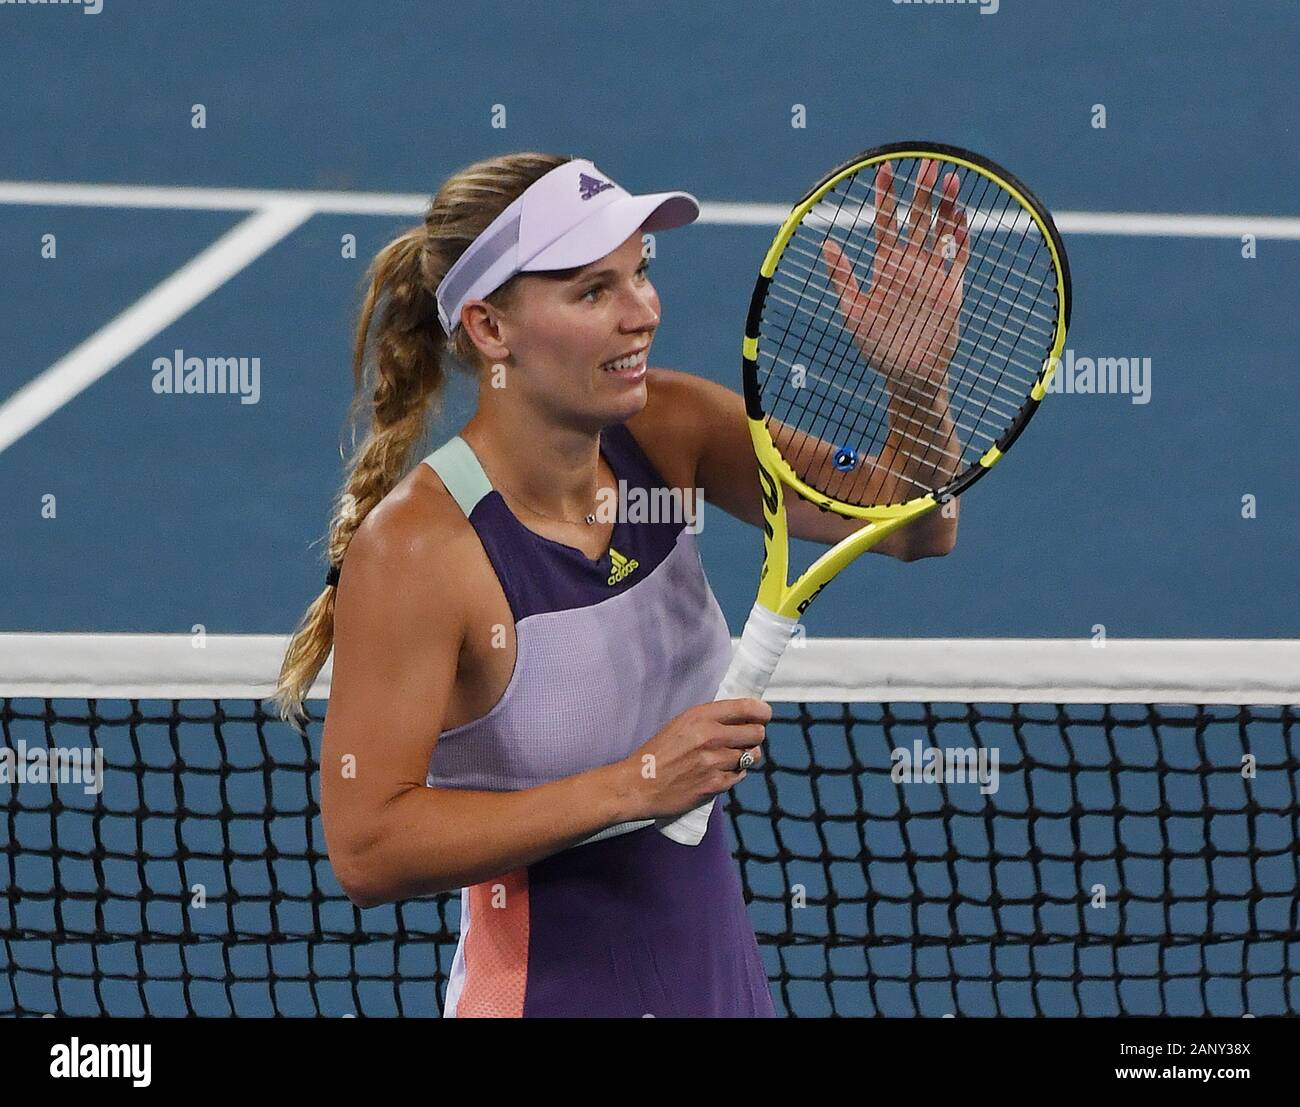 Melbourne, Australia. 20th Jan, 2020. Melbourne Park Australian Open Day 1  20/01/2020 Caroline Wozniacki (DEN) wins first round match watched by her  coach Piotr (front right) and many family and friends in